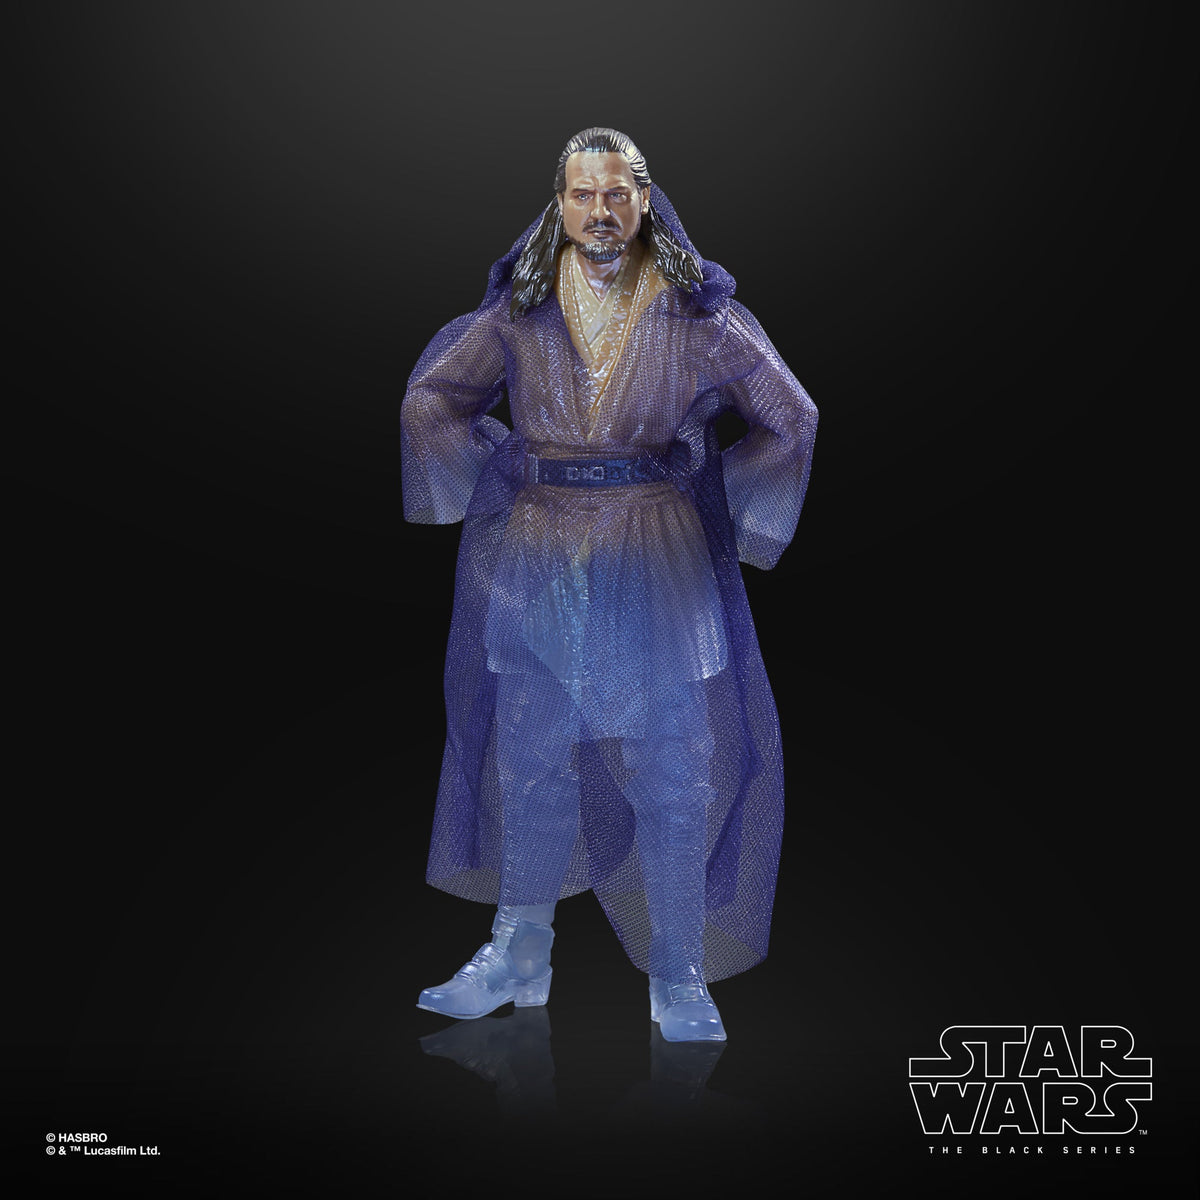 Image of qui-gon jinn from star wars